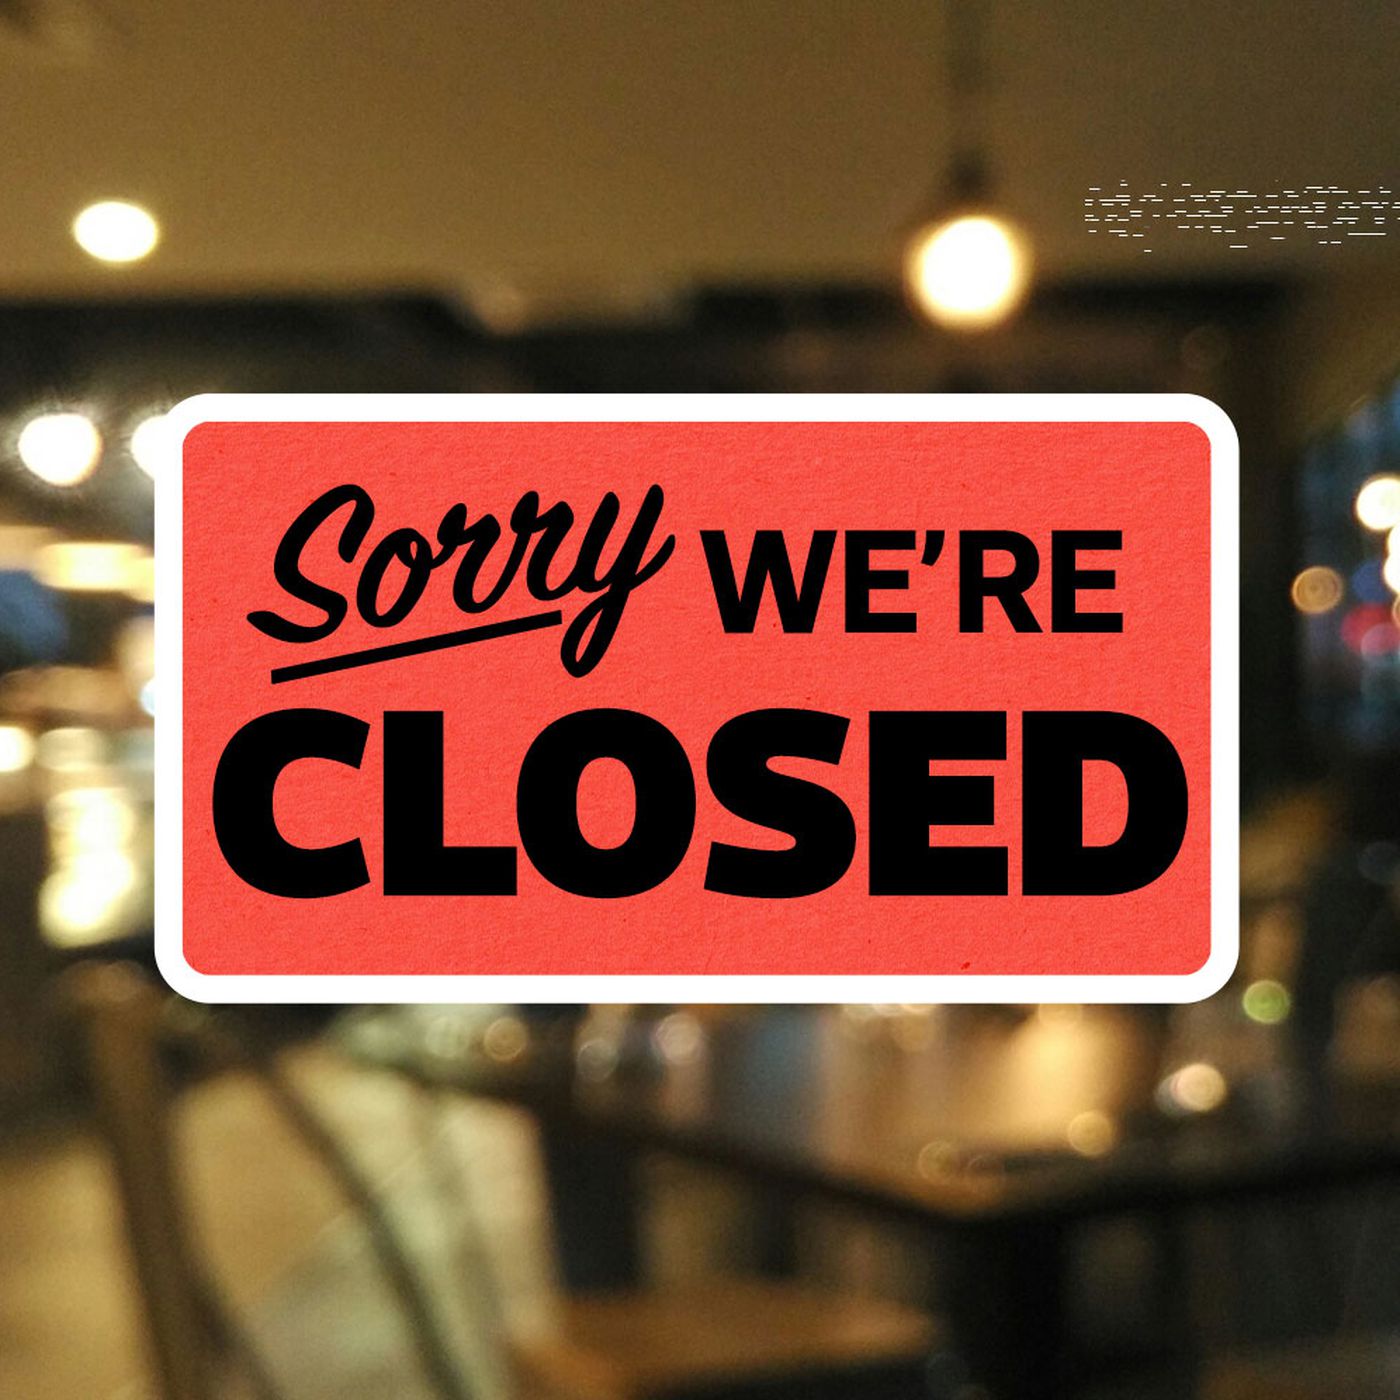 A “Sorry, We’re Closed,” sign in a nondescript window